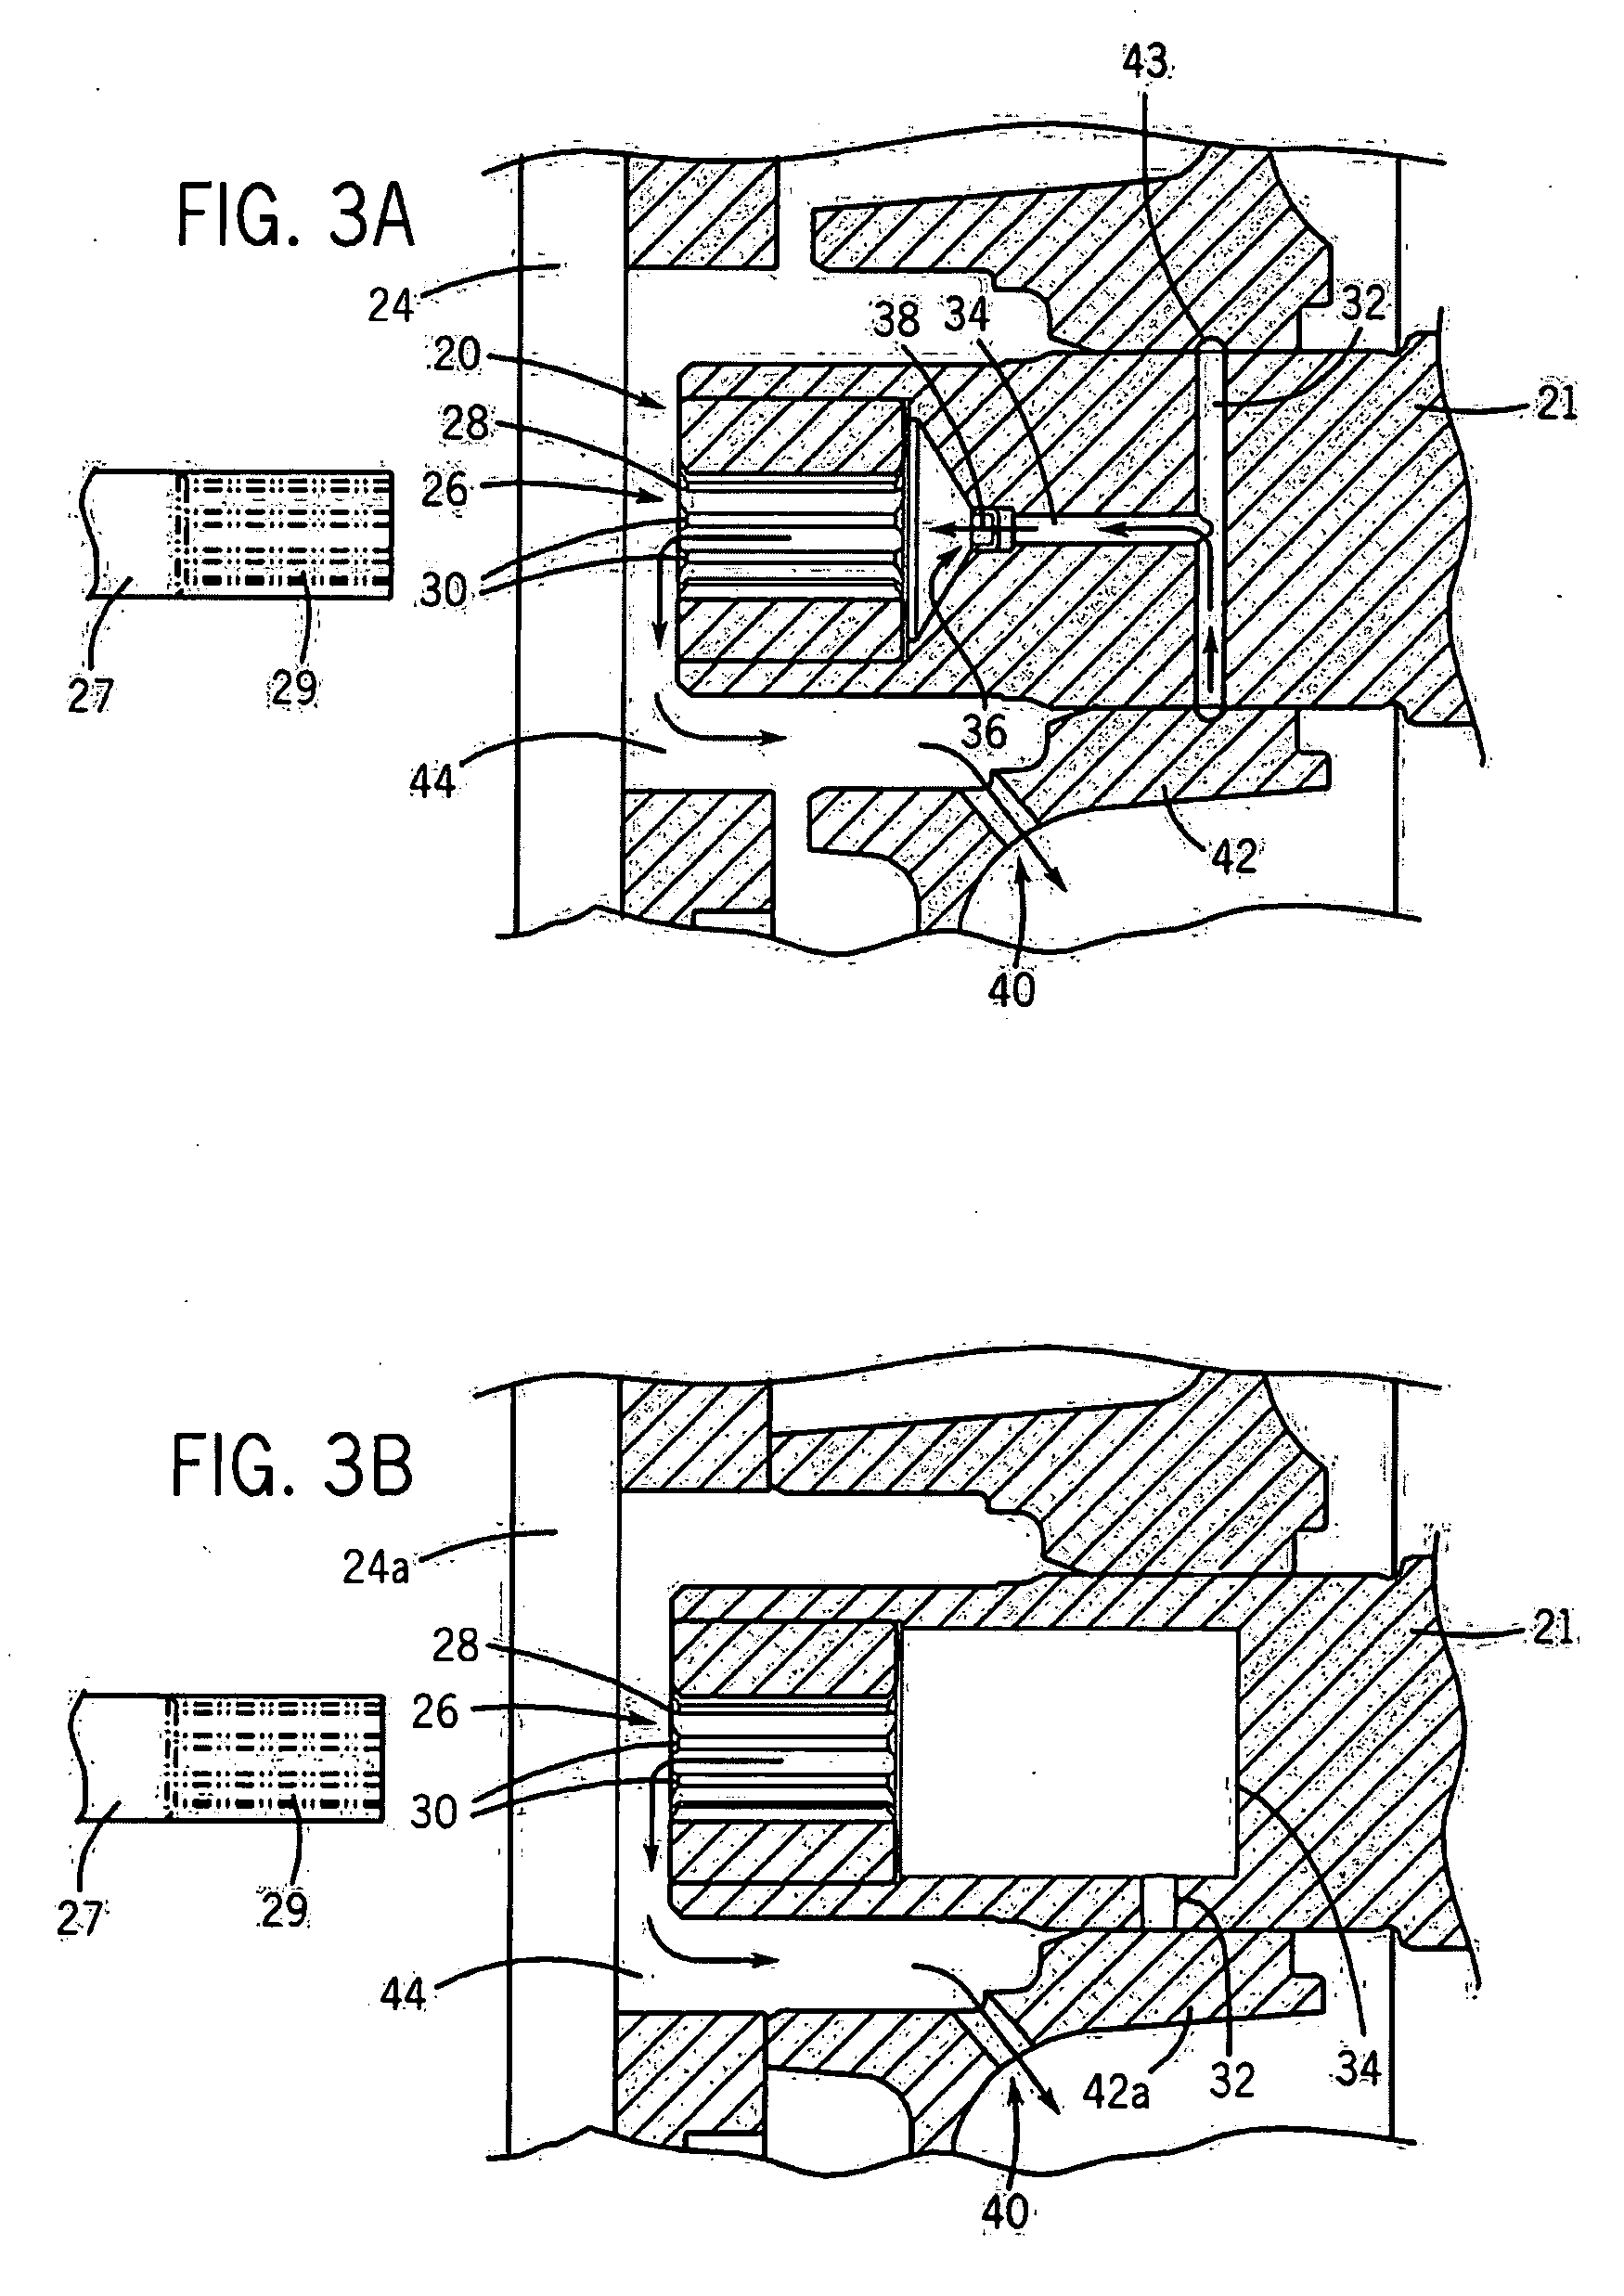 System and Method for Lubricating Power Transmitting Elements